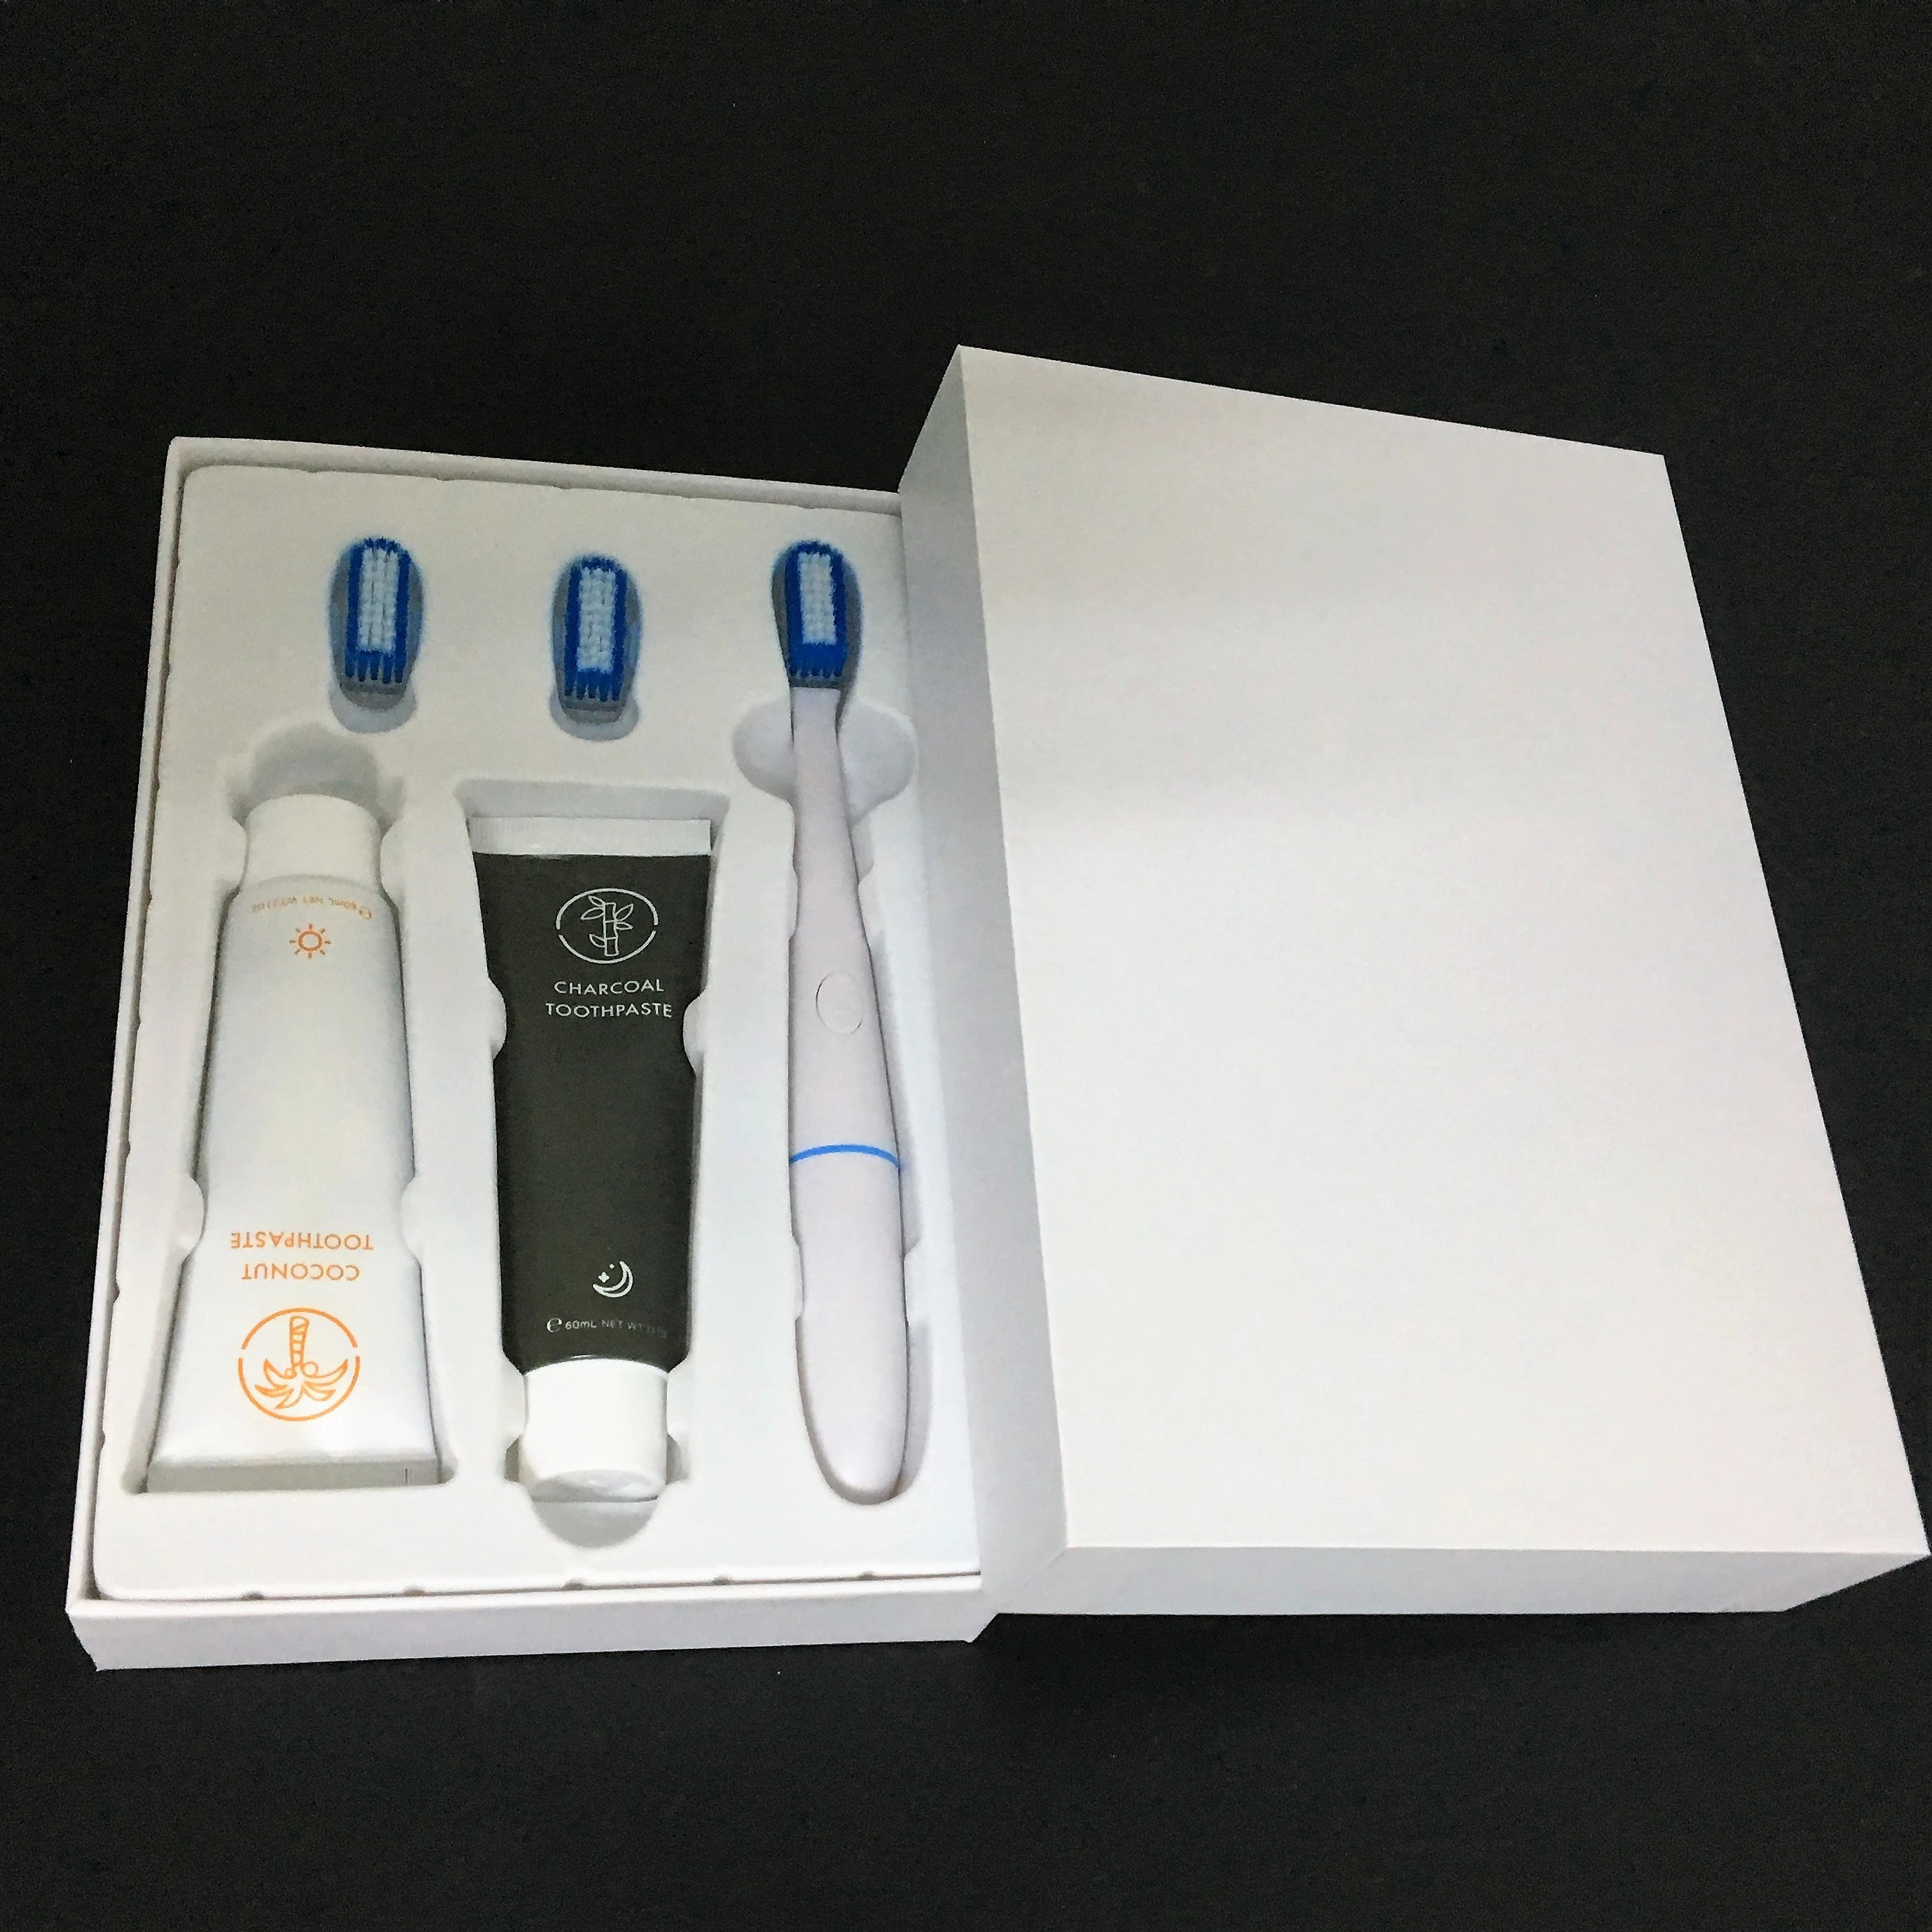 New Science Optical Oral Care Kit Toothbrush Whitening LED Blue Light with Natural Teeth Whitening Toothpaste